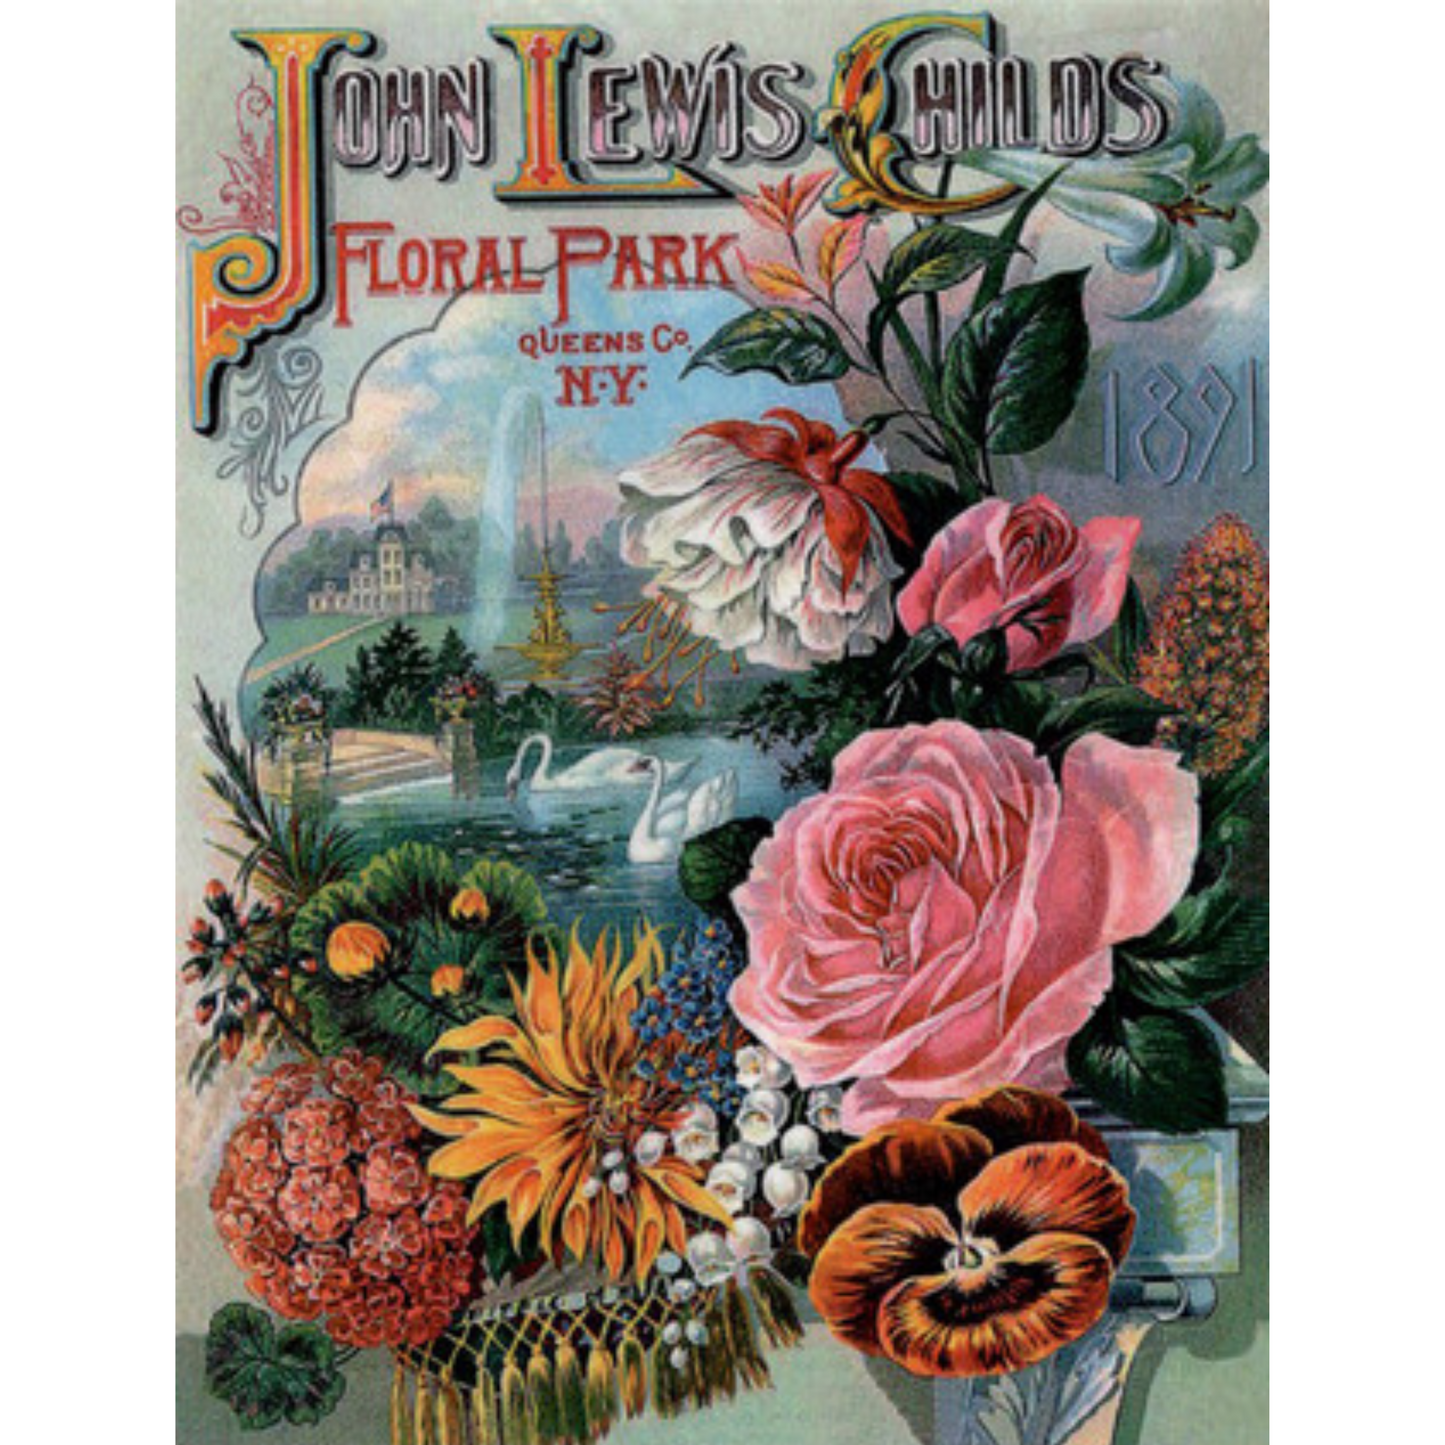 "Childs 1891 Floral Park Catologue"  TT102 decoupage paper by Calambour. Size A4 available at Milton's Daughter.